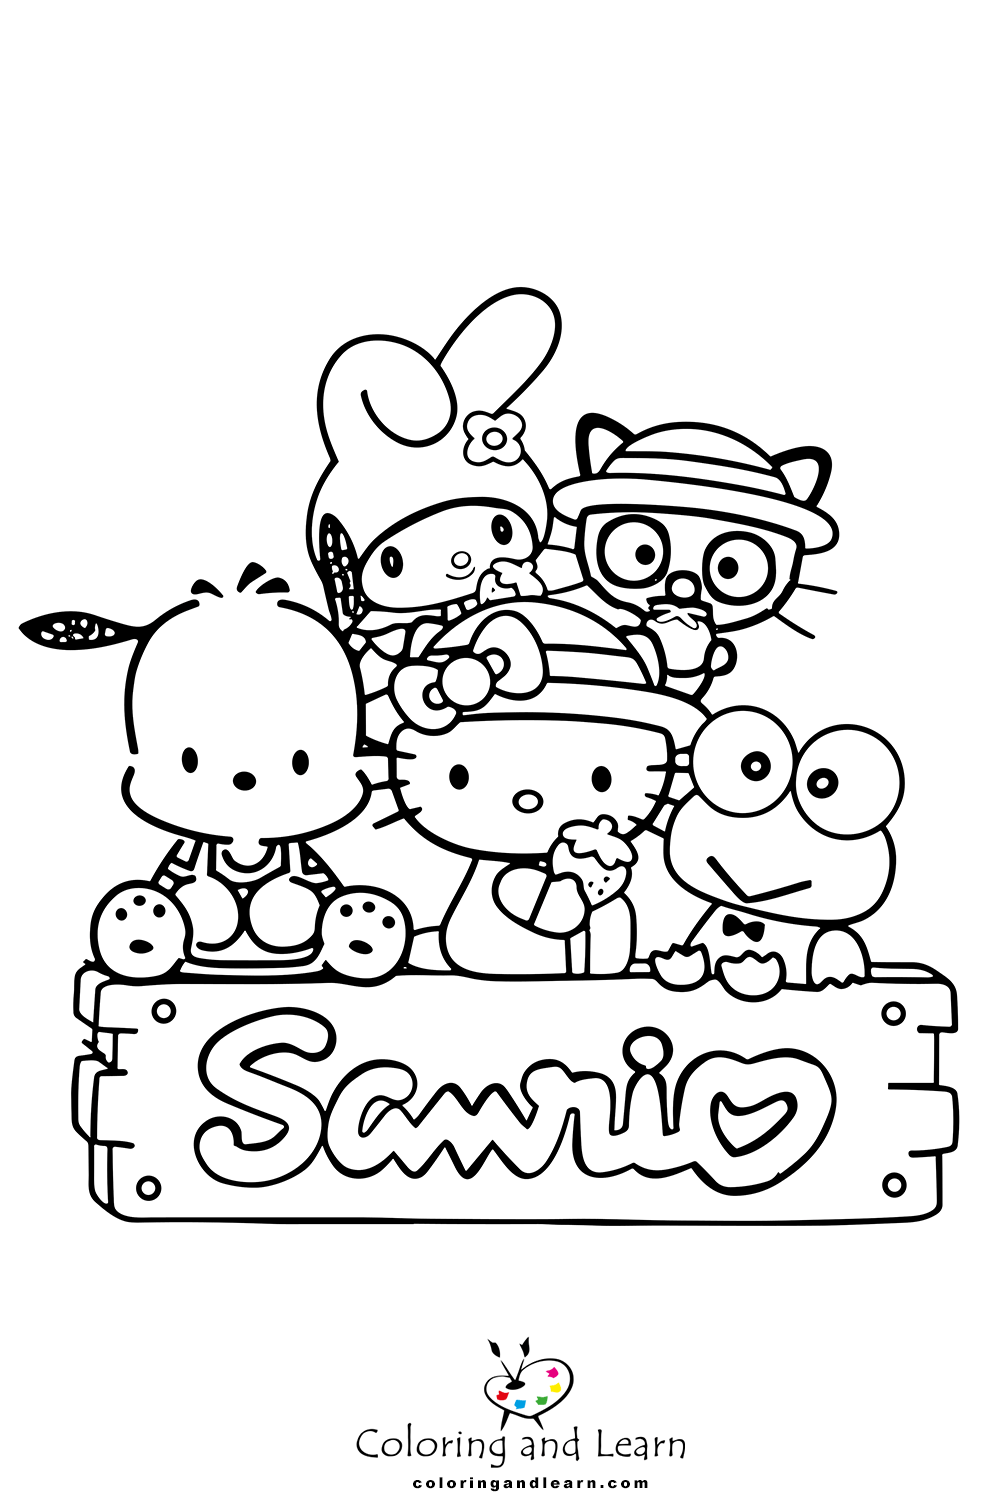 Sanrio Coloring Pages (2023) - Coloring and Learn